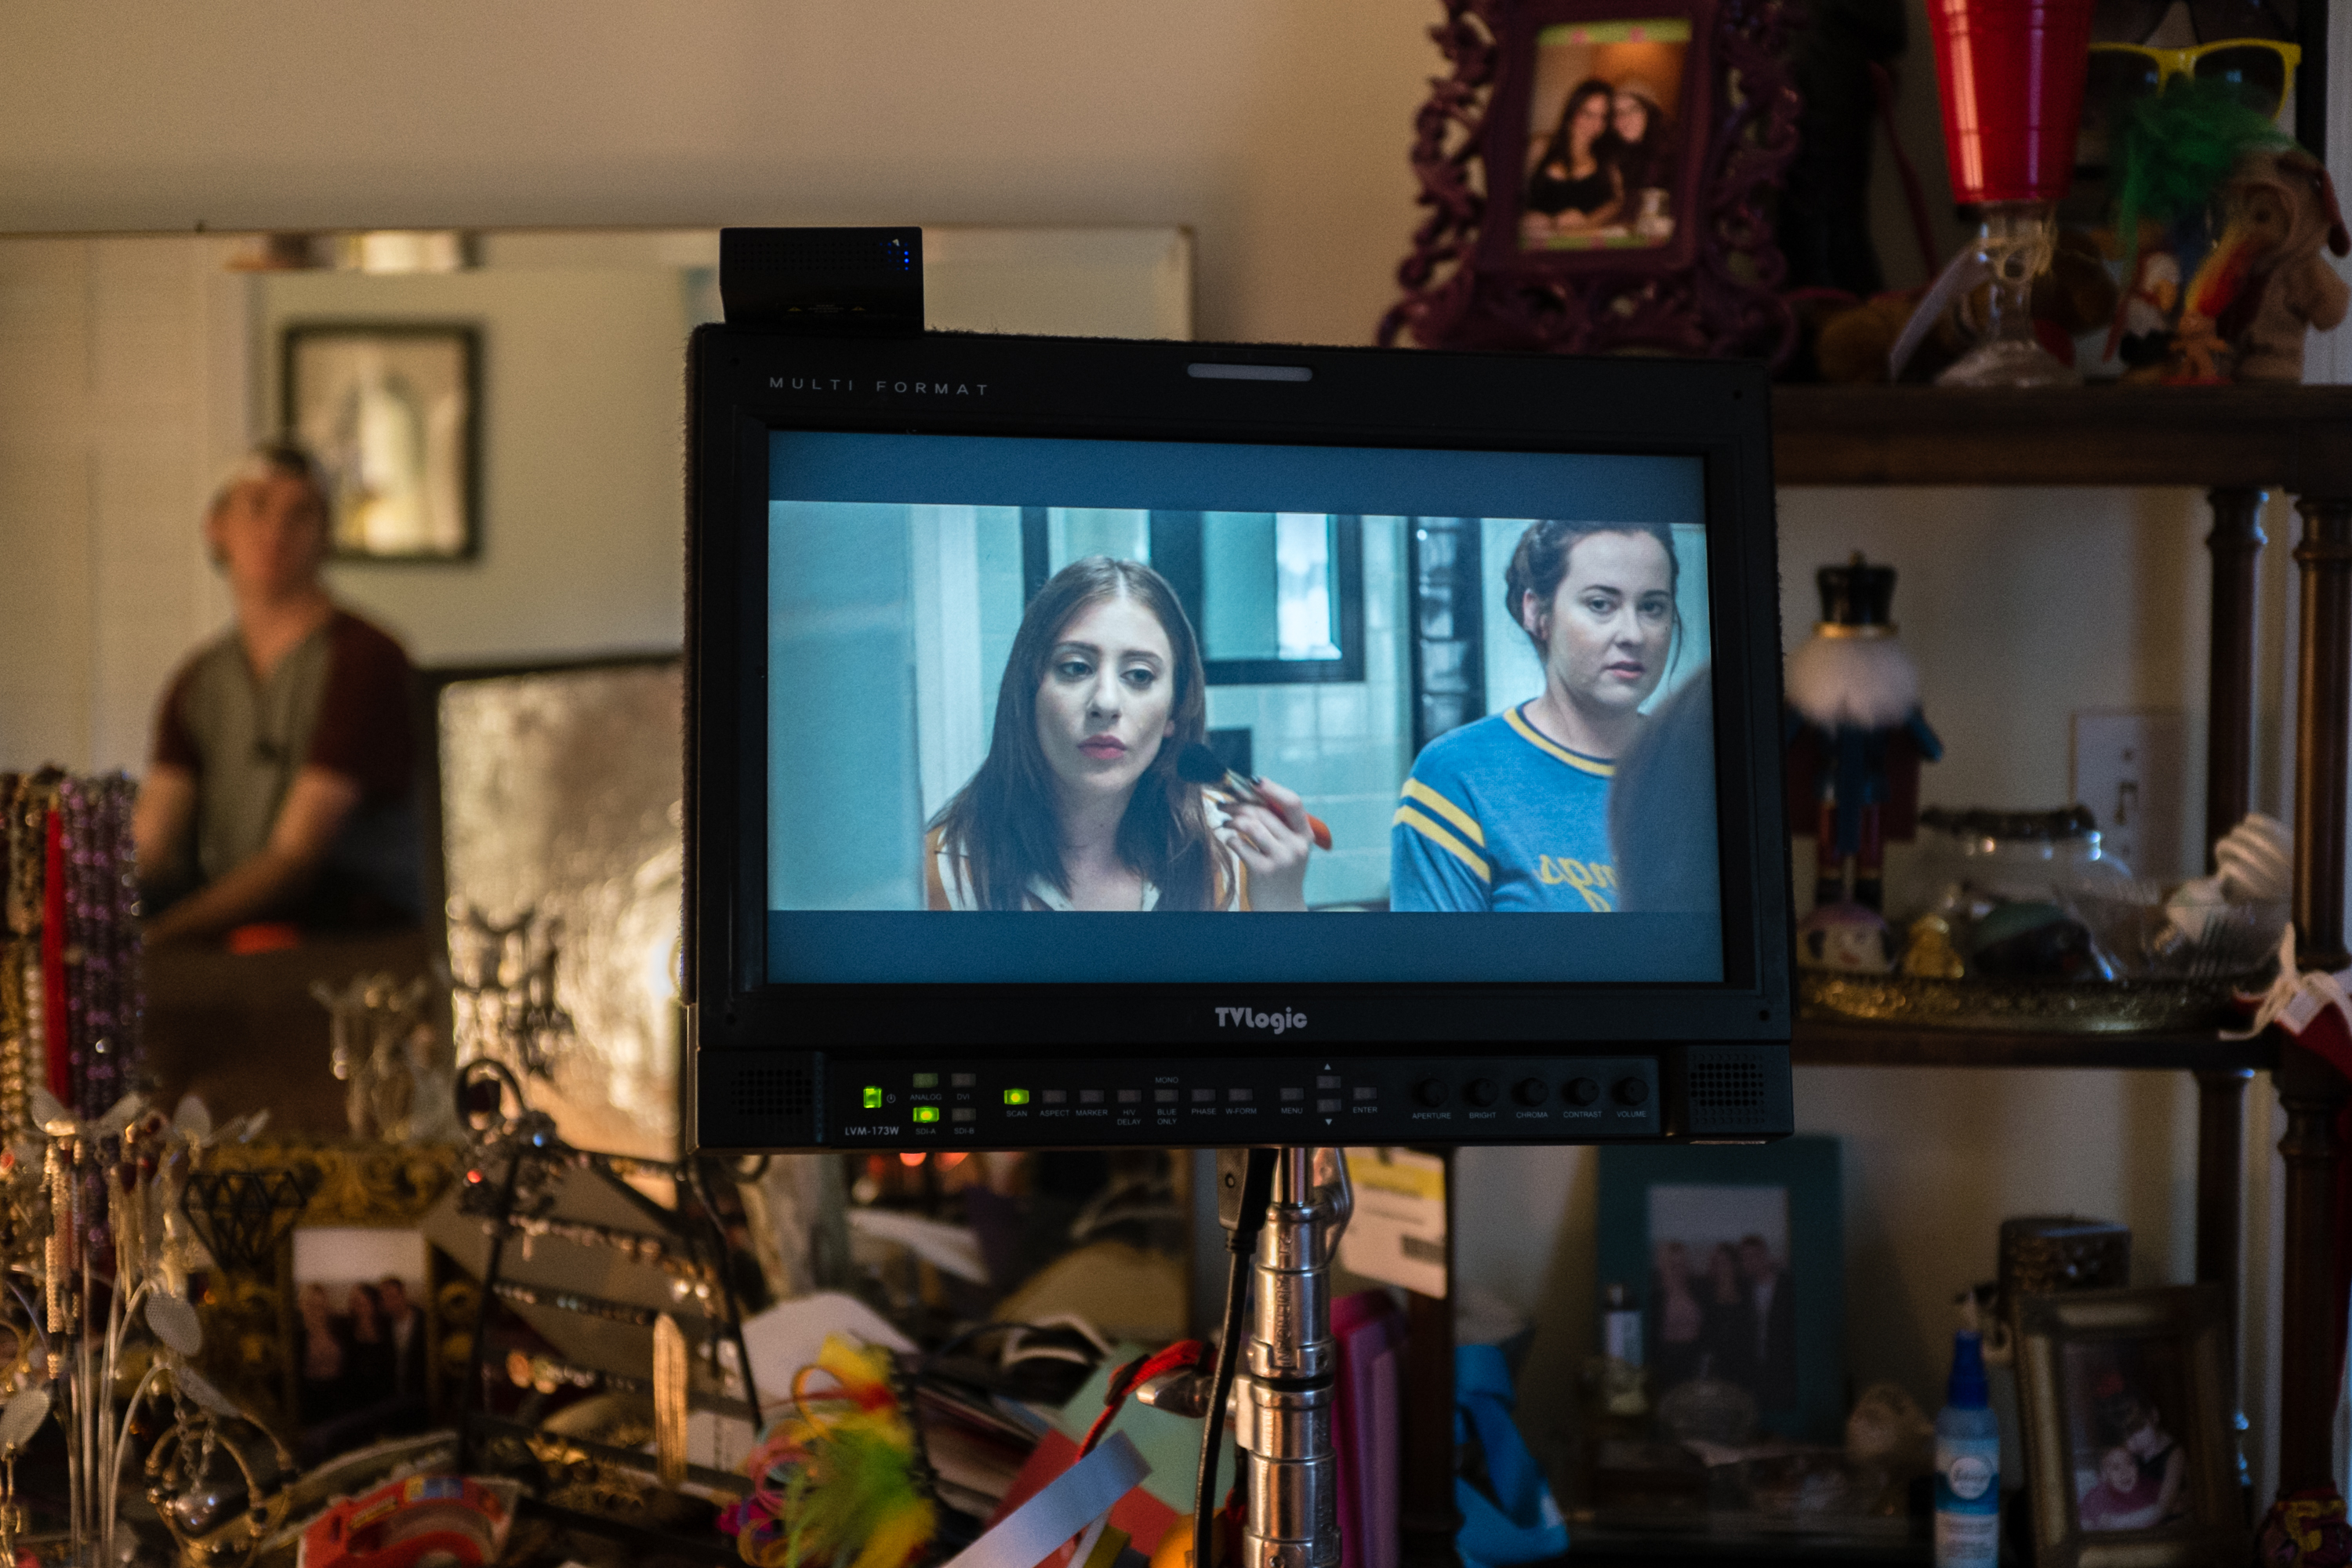 Bryn Woznicki & Chelsea Morgan in the monitor, 1st AC Sean Goode in the background. On the set of 